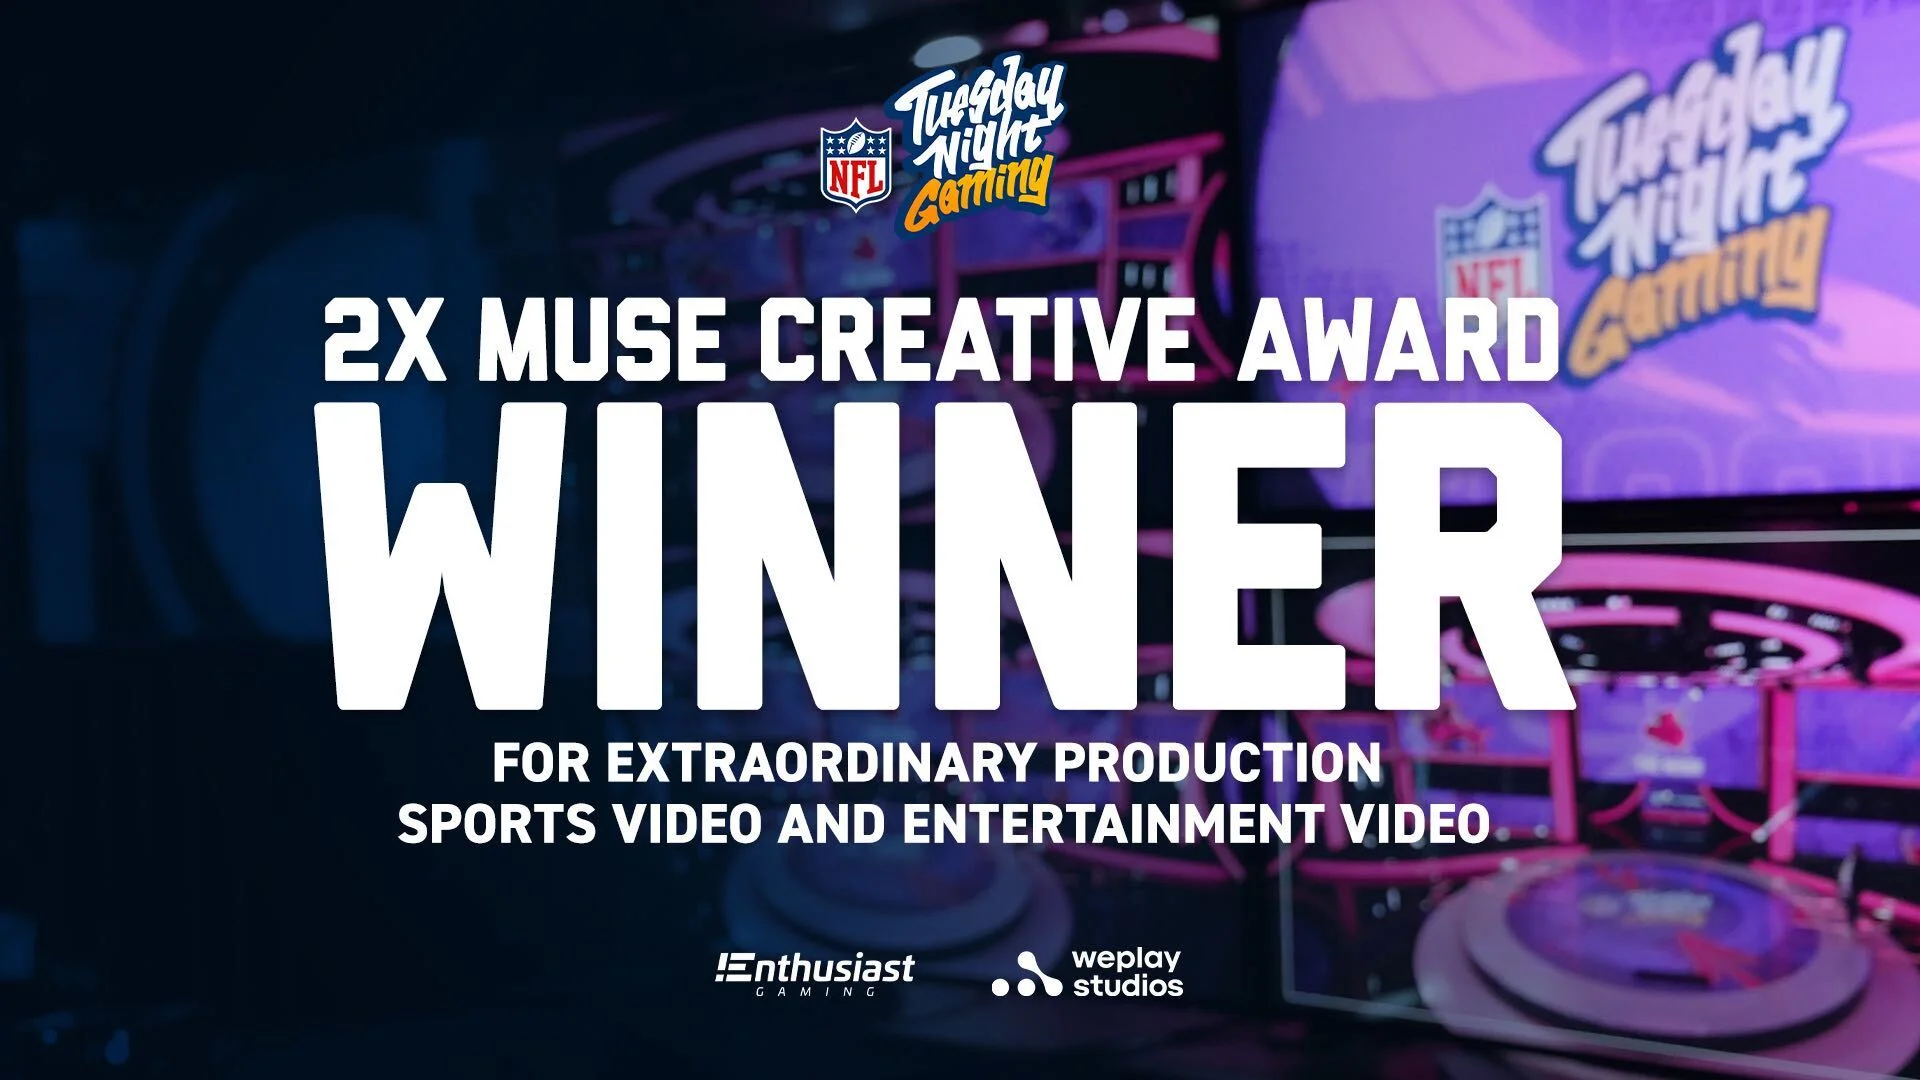 NFL Tuesday Night Gaming Wins Two Golds at MUSE Creative Awards. Visual: NFL Tuesday Night Gaming